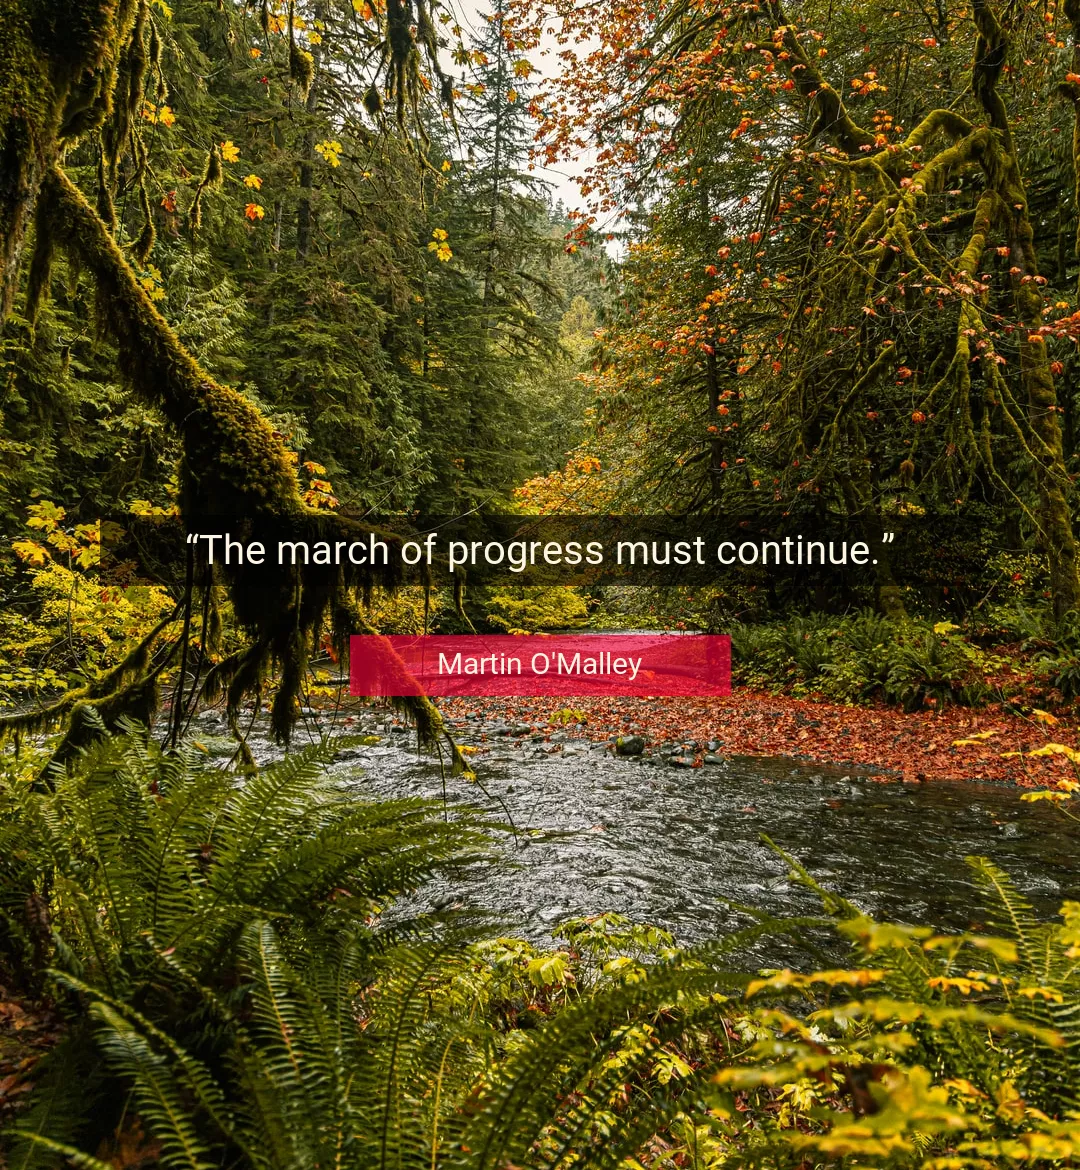 Quote About Progress By Martin O'Malley